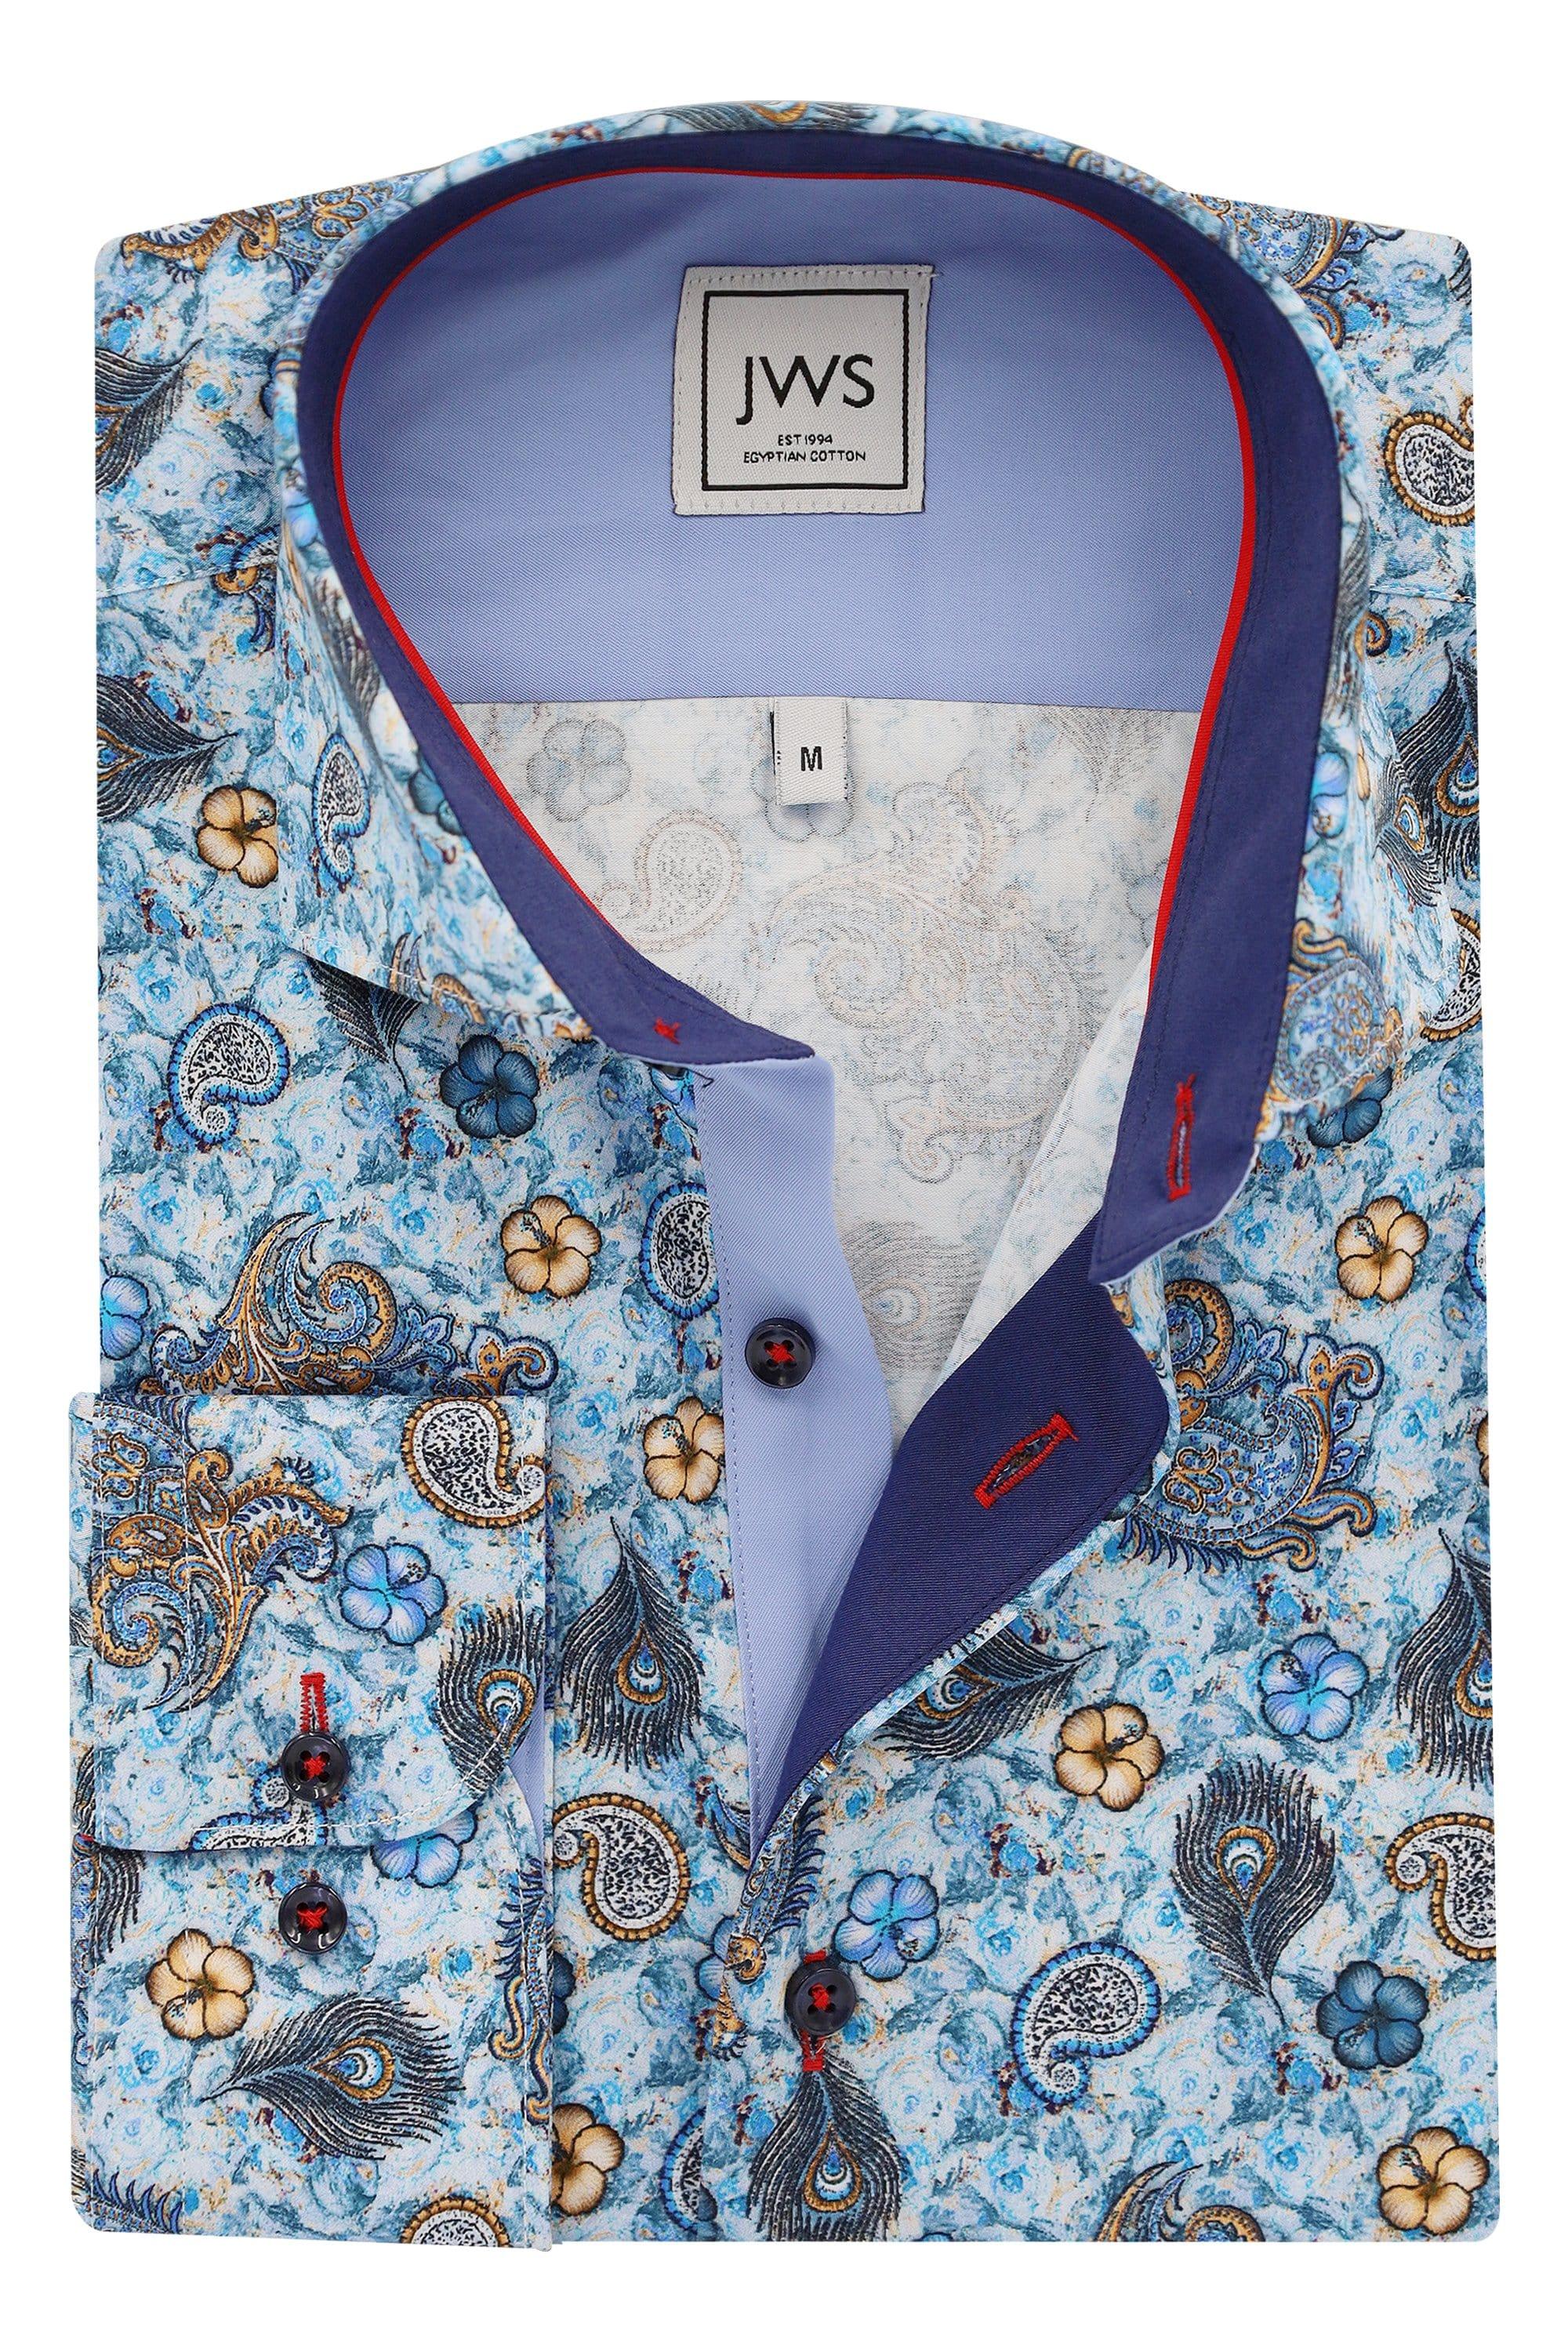 Yellow Floral and Paisley on Blue Ground - Just White Shirts